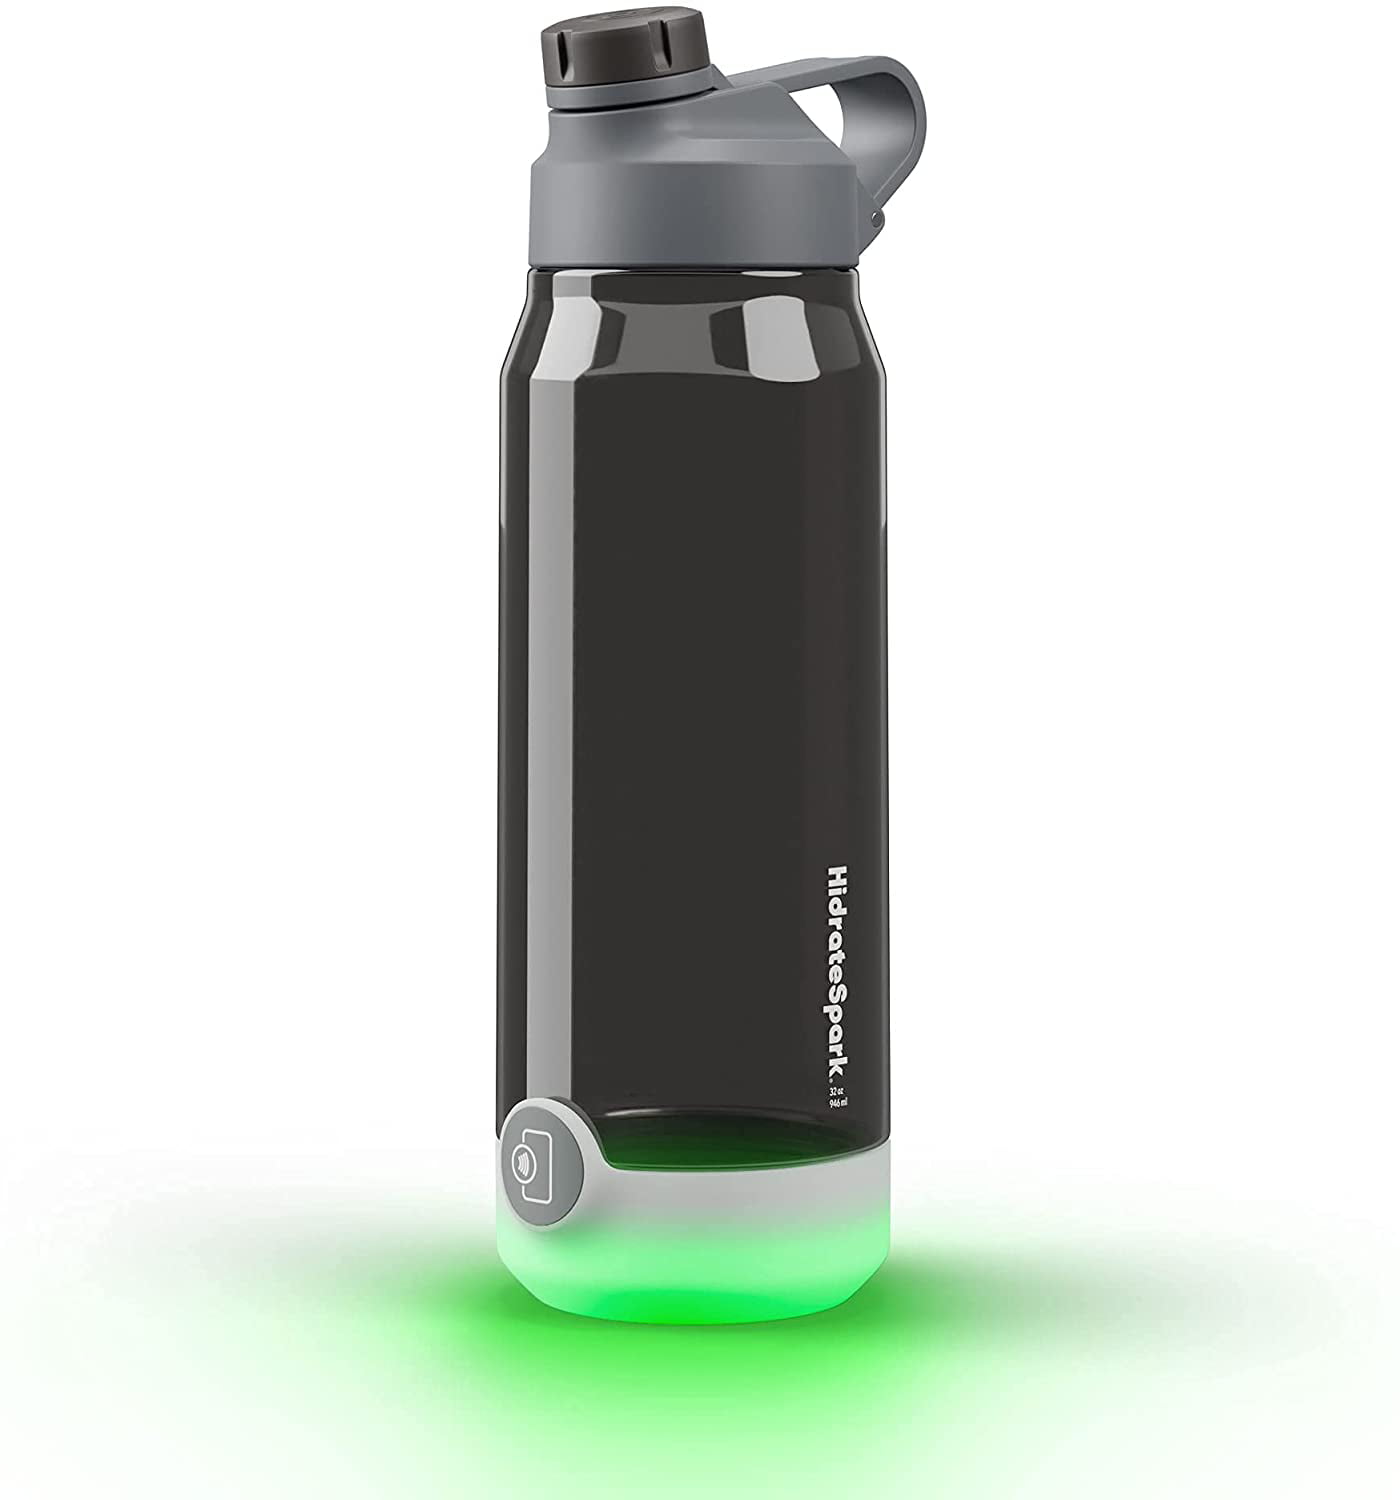 Tracks Water Intake & Glows to Remind You to Stay Hydrated Hidrate Spark 3 Smart Water Bottle 